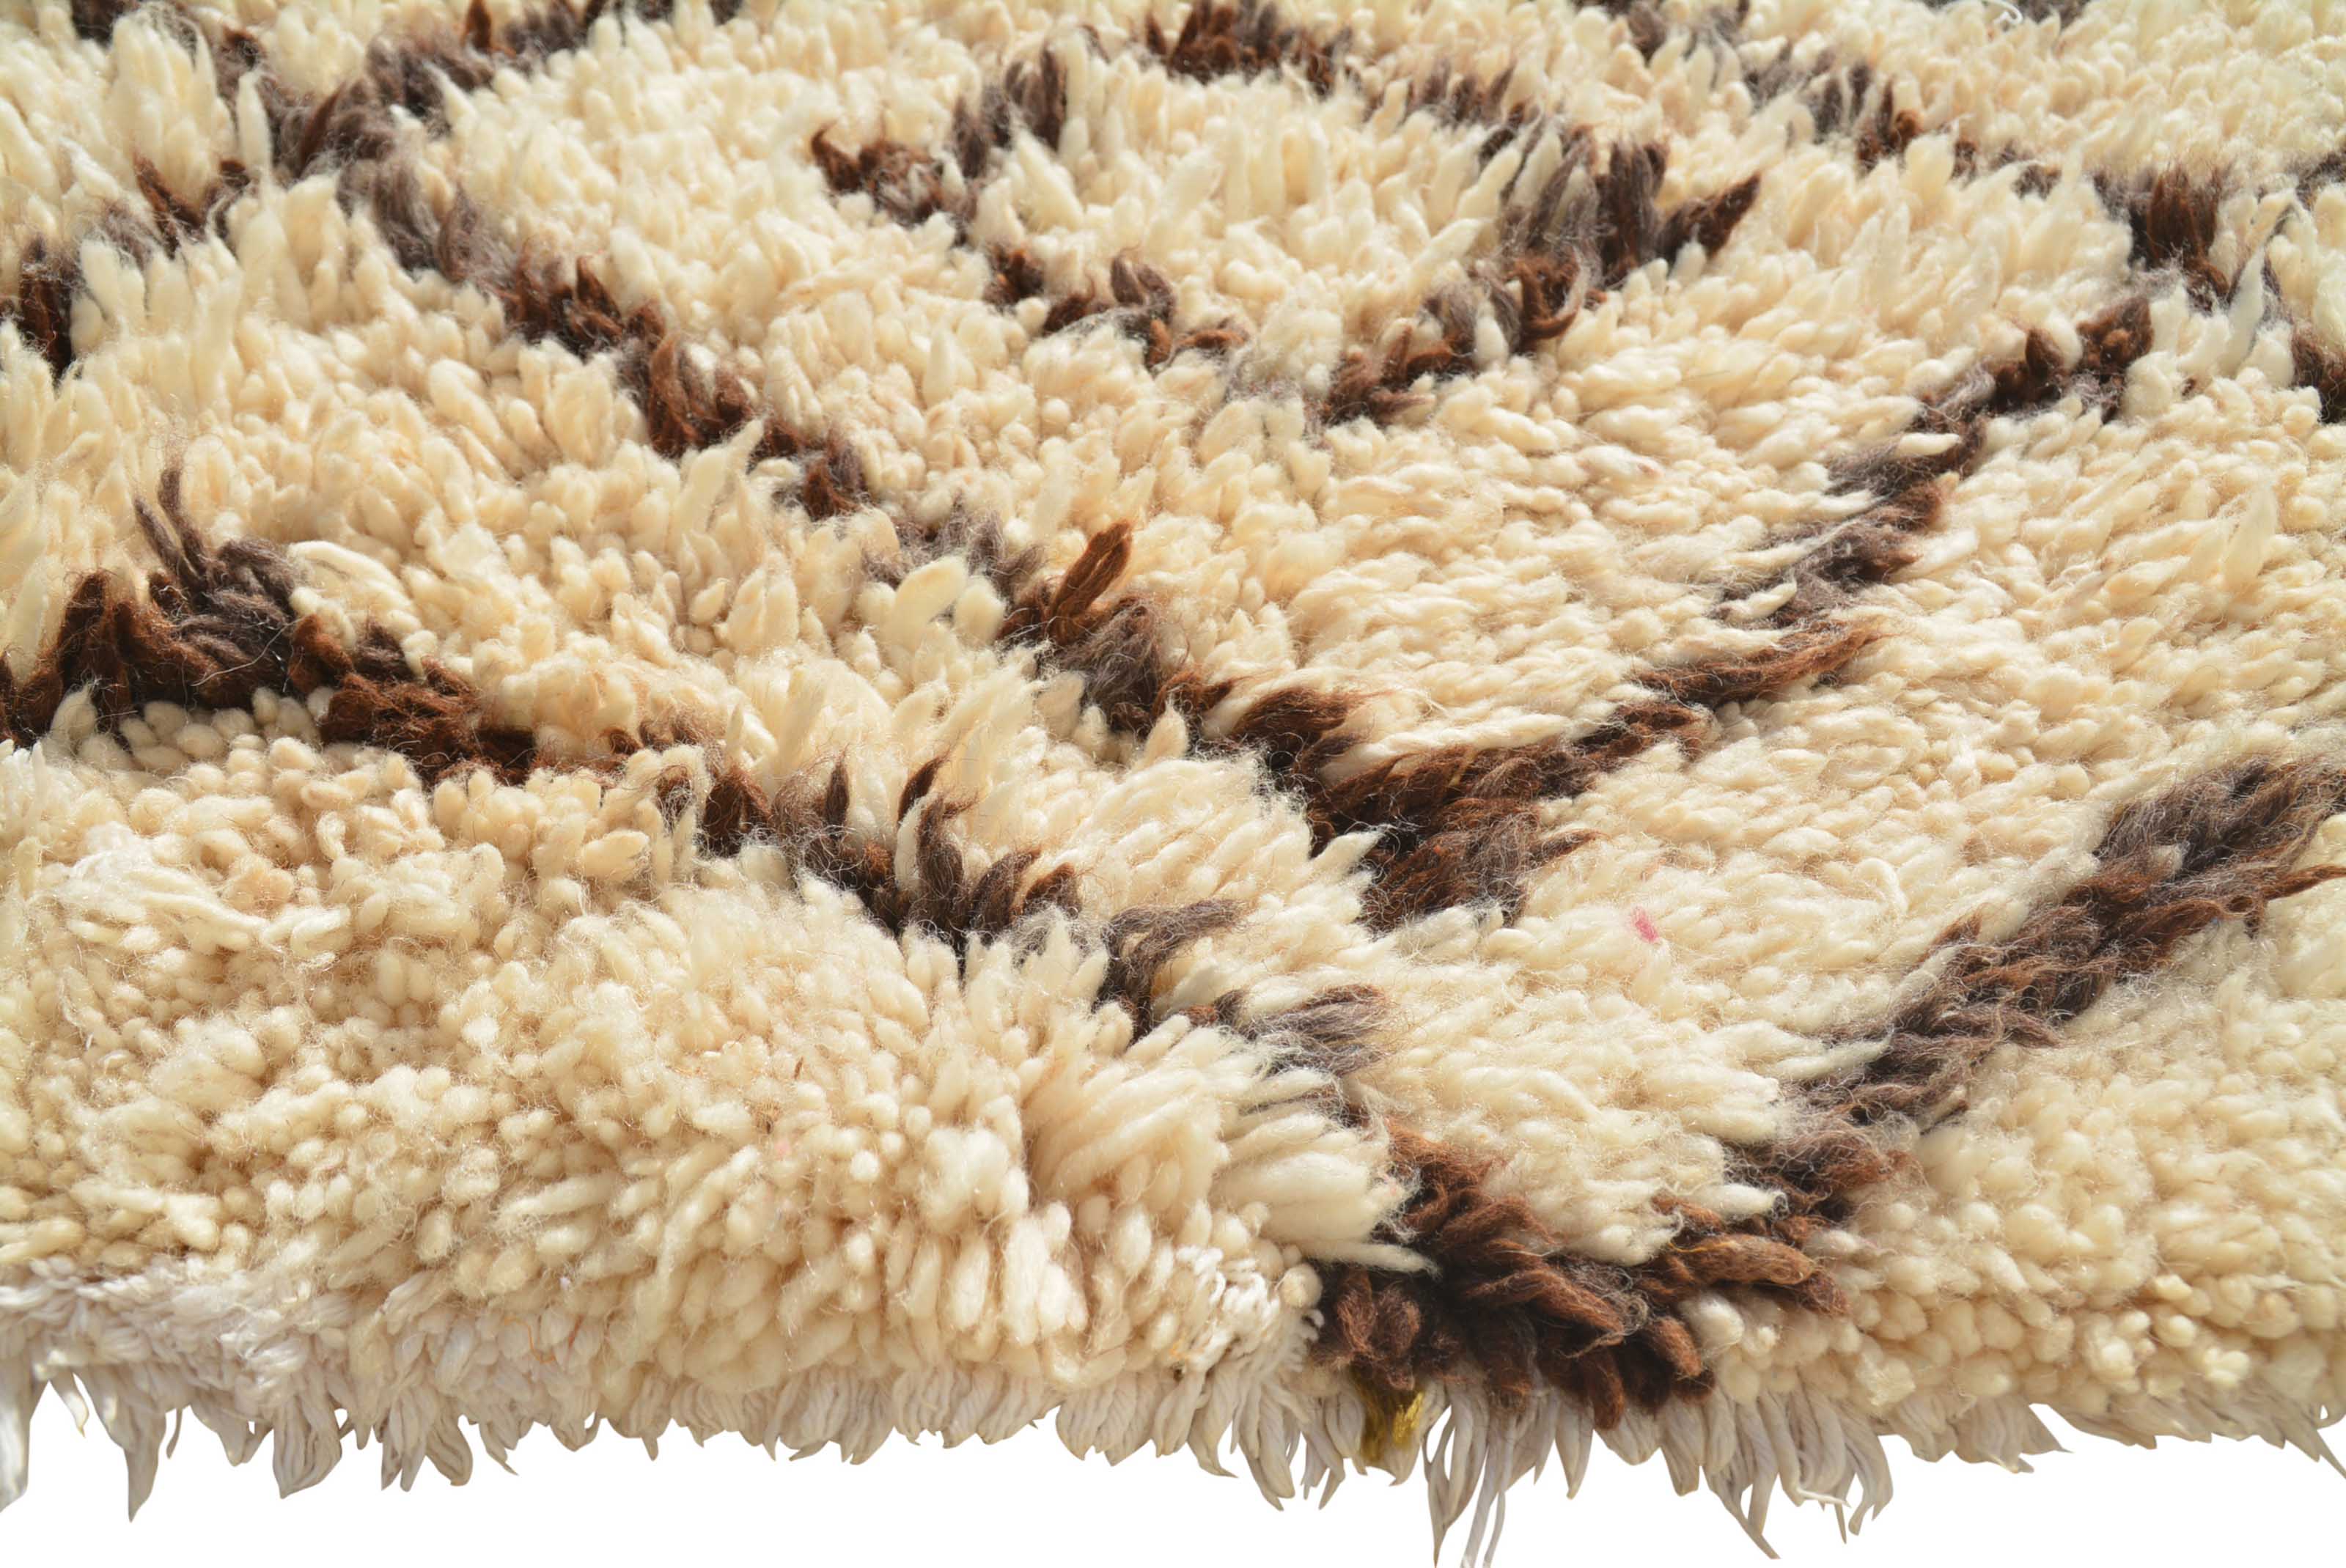 Vintage Inspired Rugs | Runner Rugs Illuminate Collective 